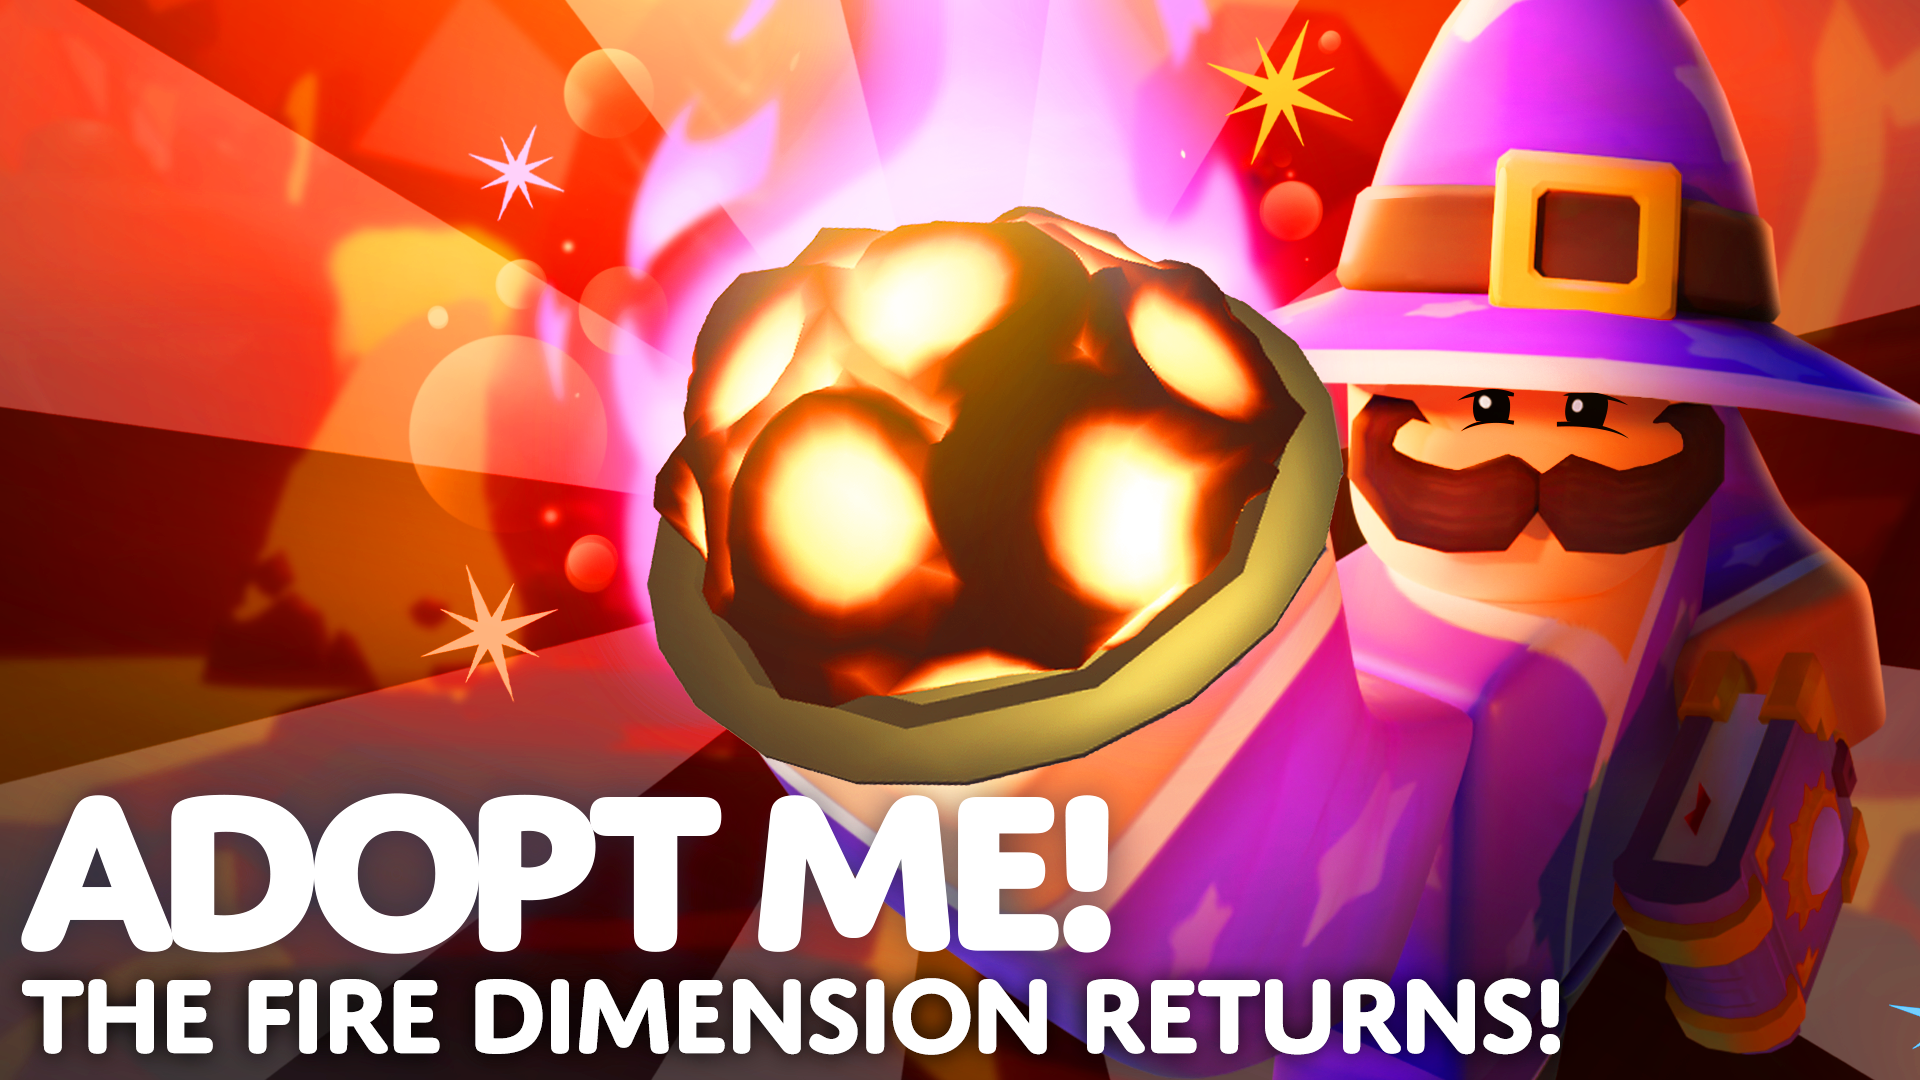 Tim welcomes you to the re-opened Fire Dimension, holding out a new Baked Alaska Bait